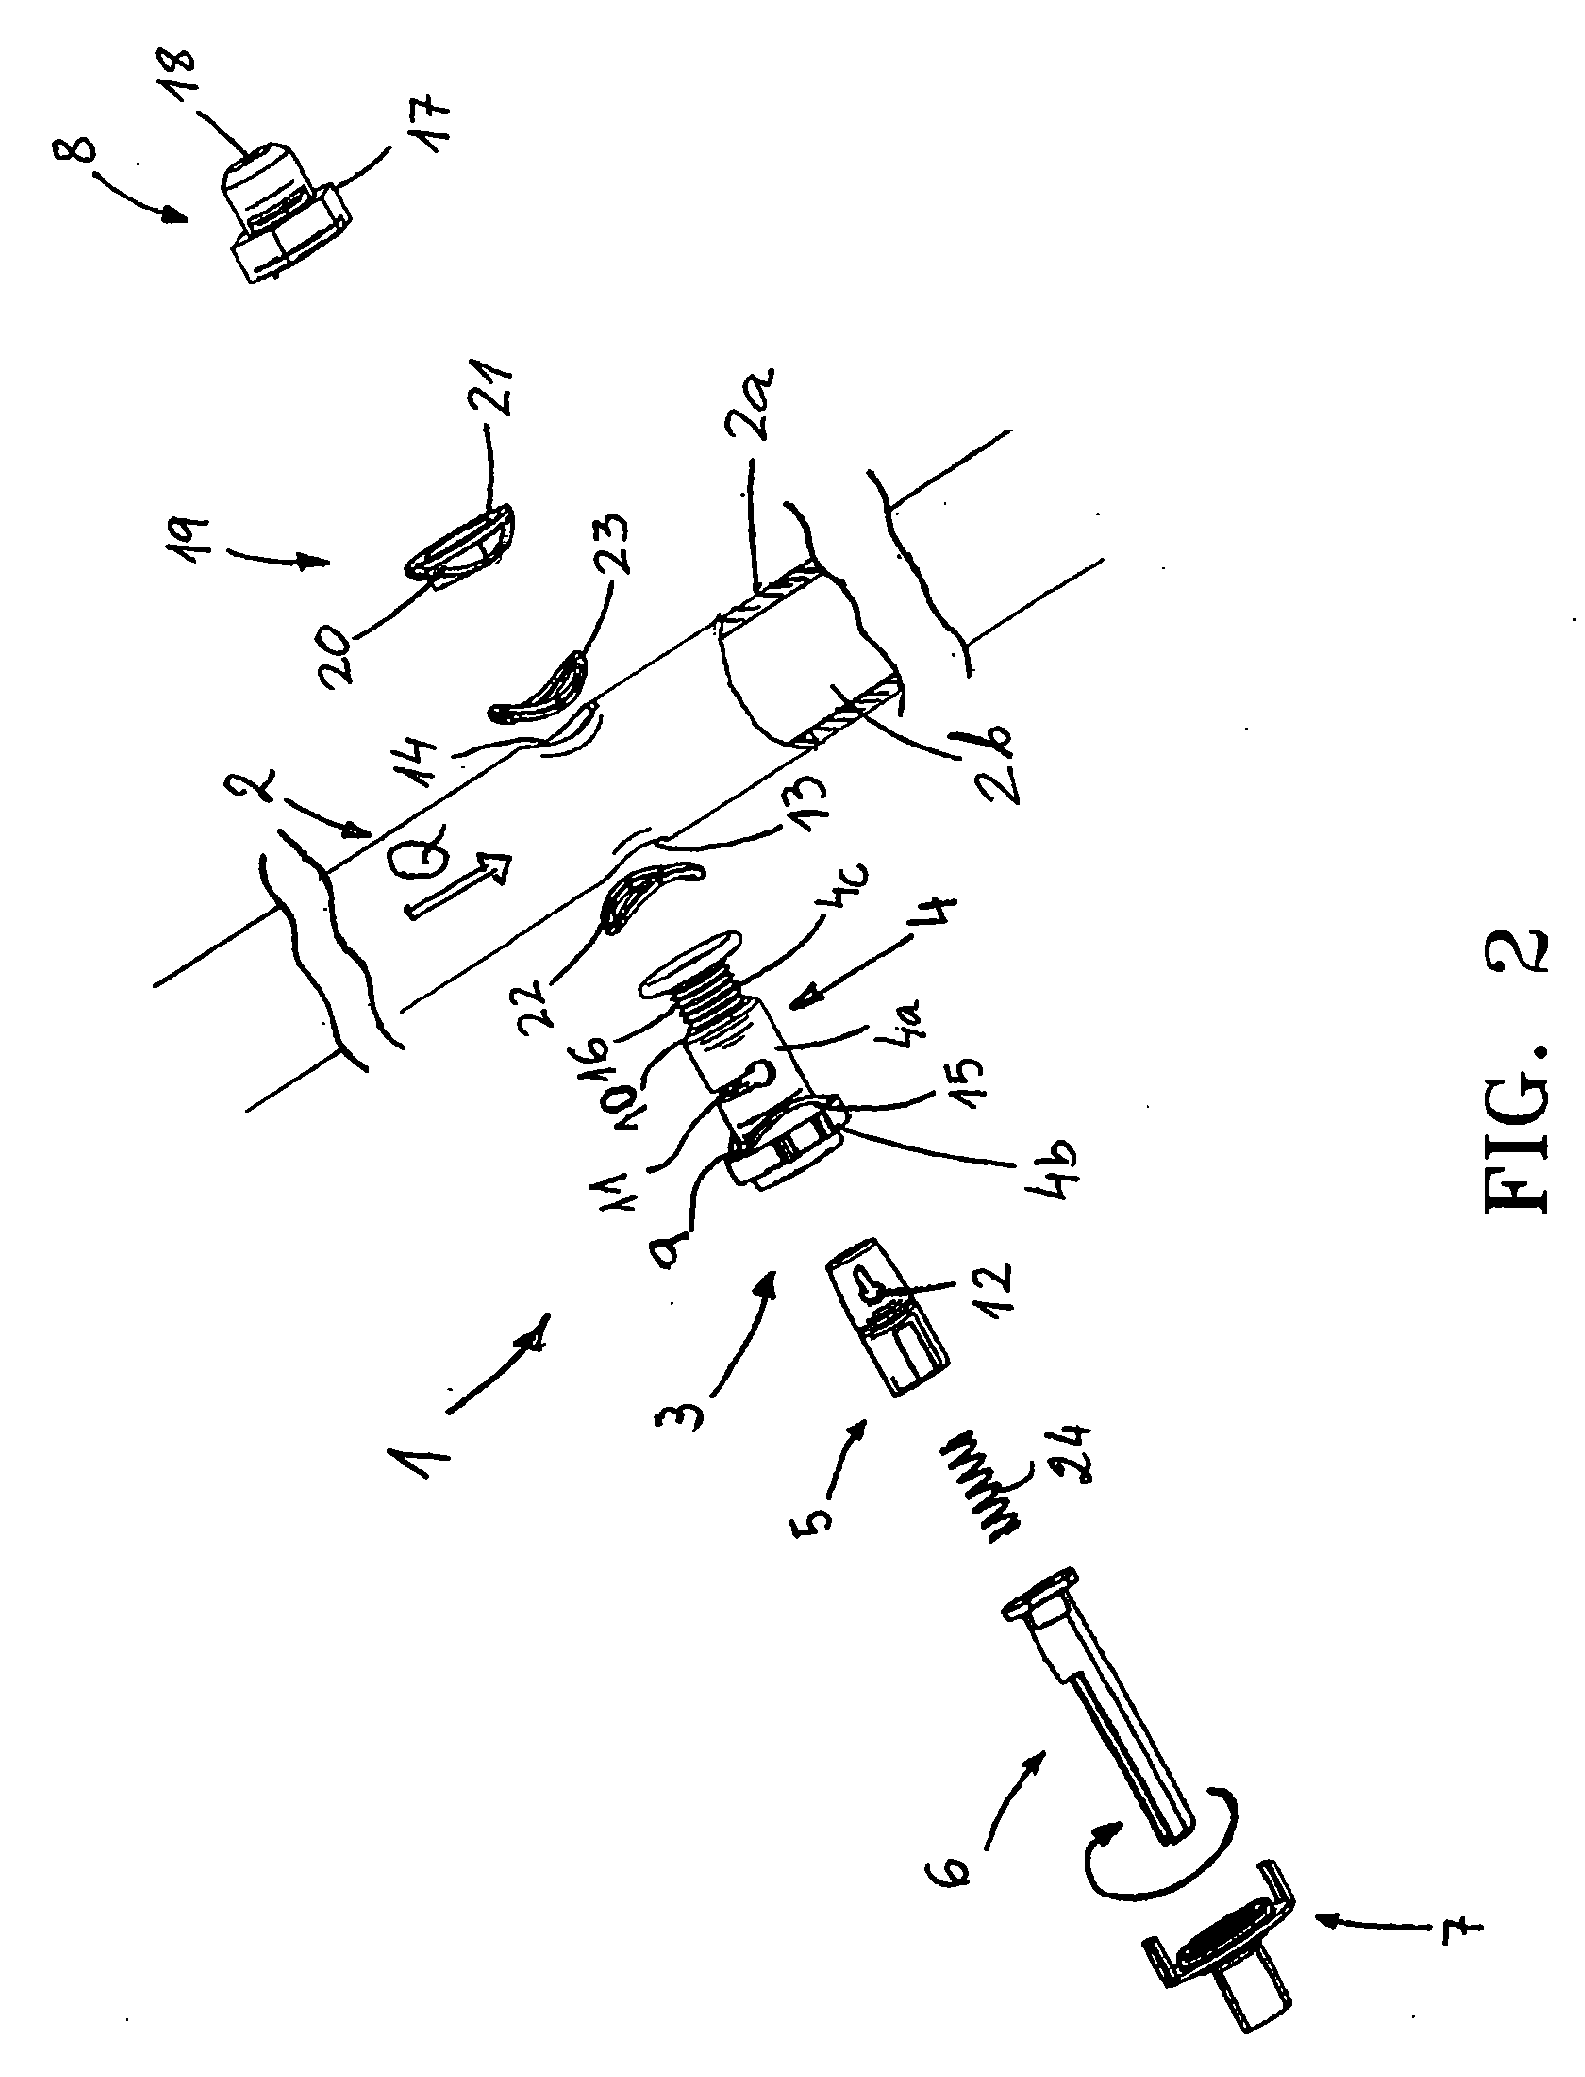 Device for distributing gas to a cooking appliance